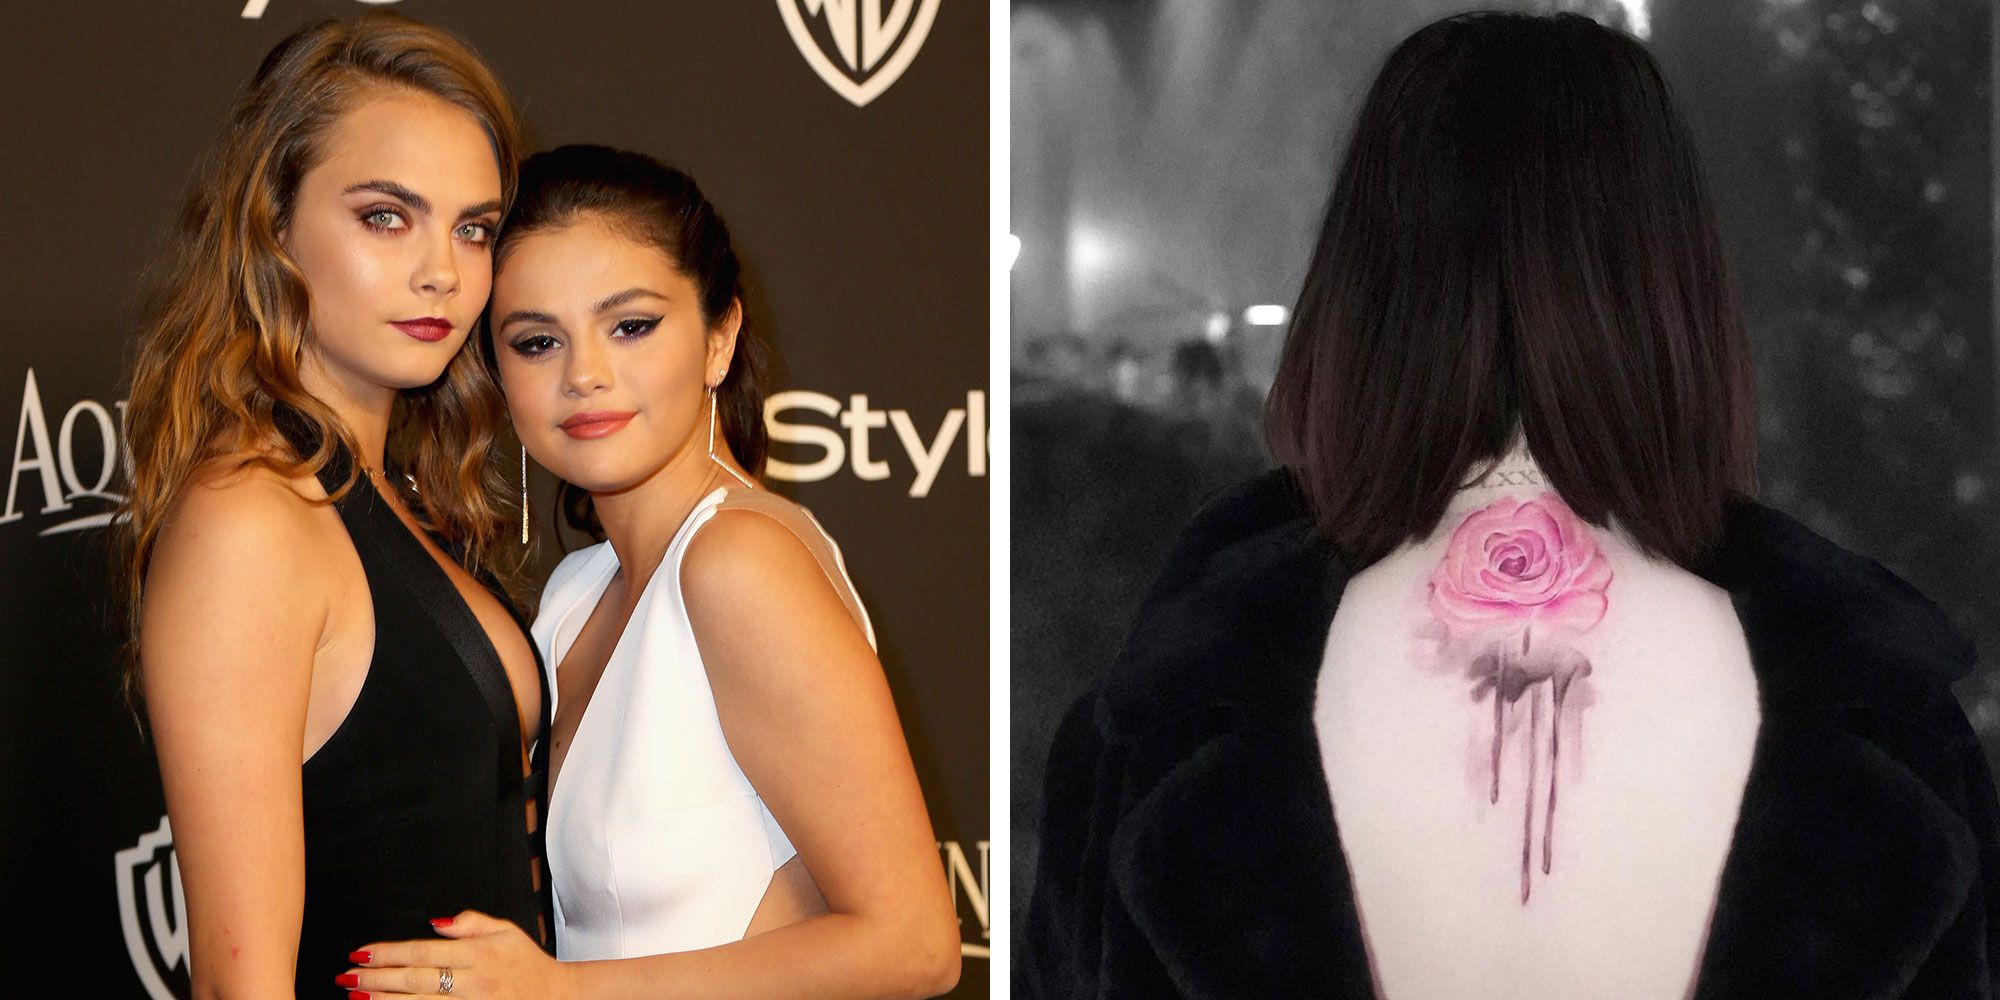 Selena Gomez Explains the Meaning Behind Her New Rose Tattoo